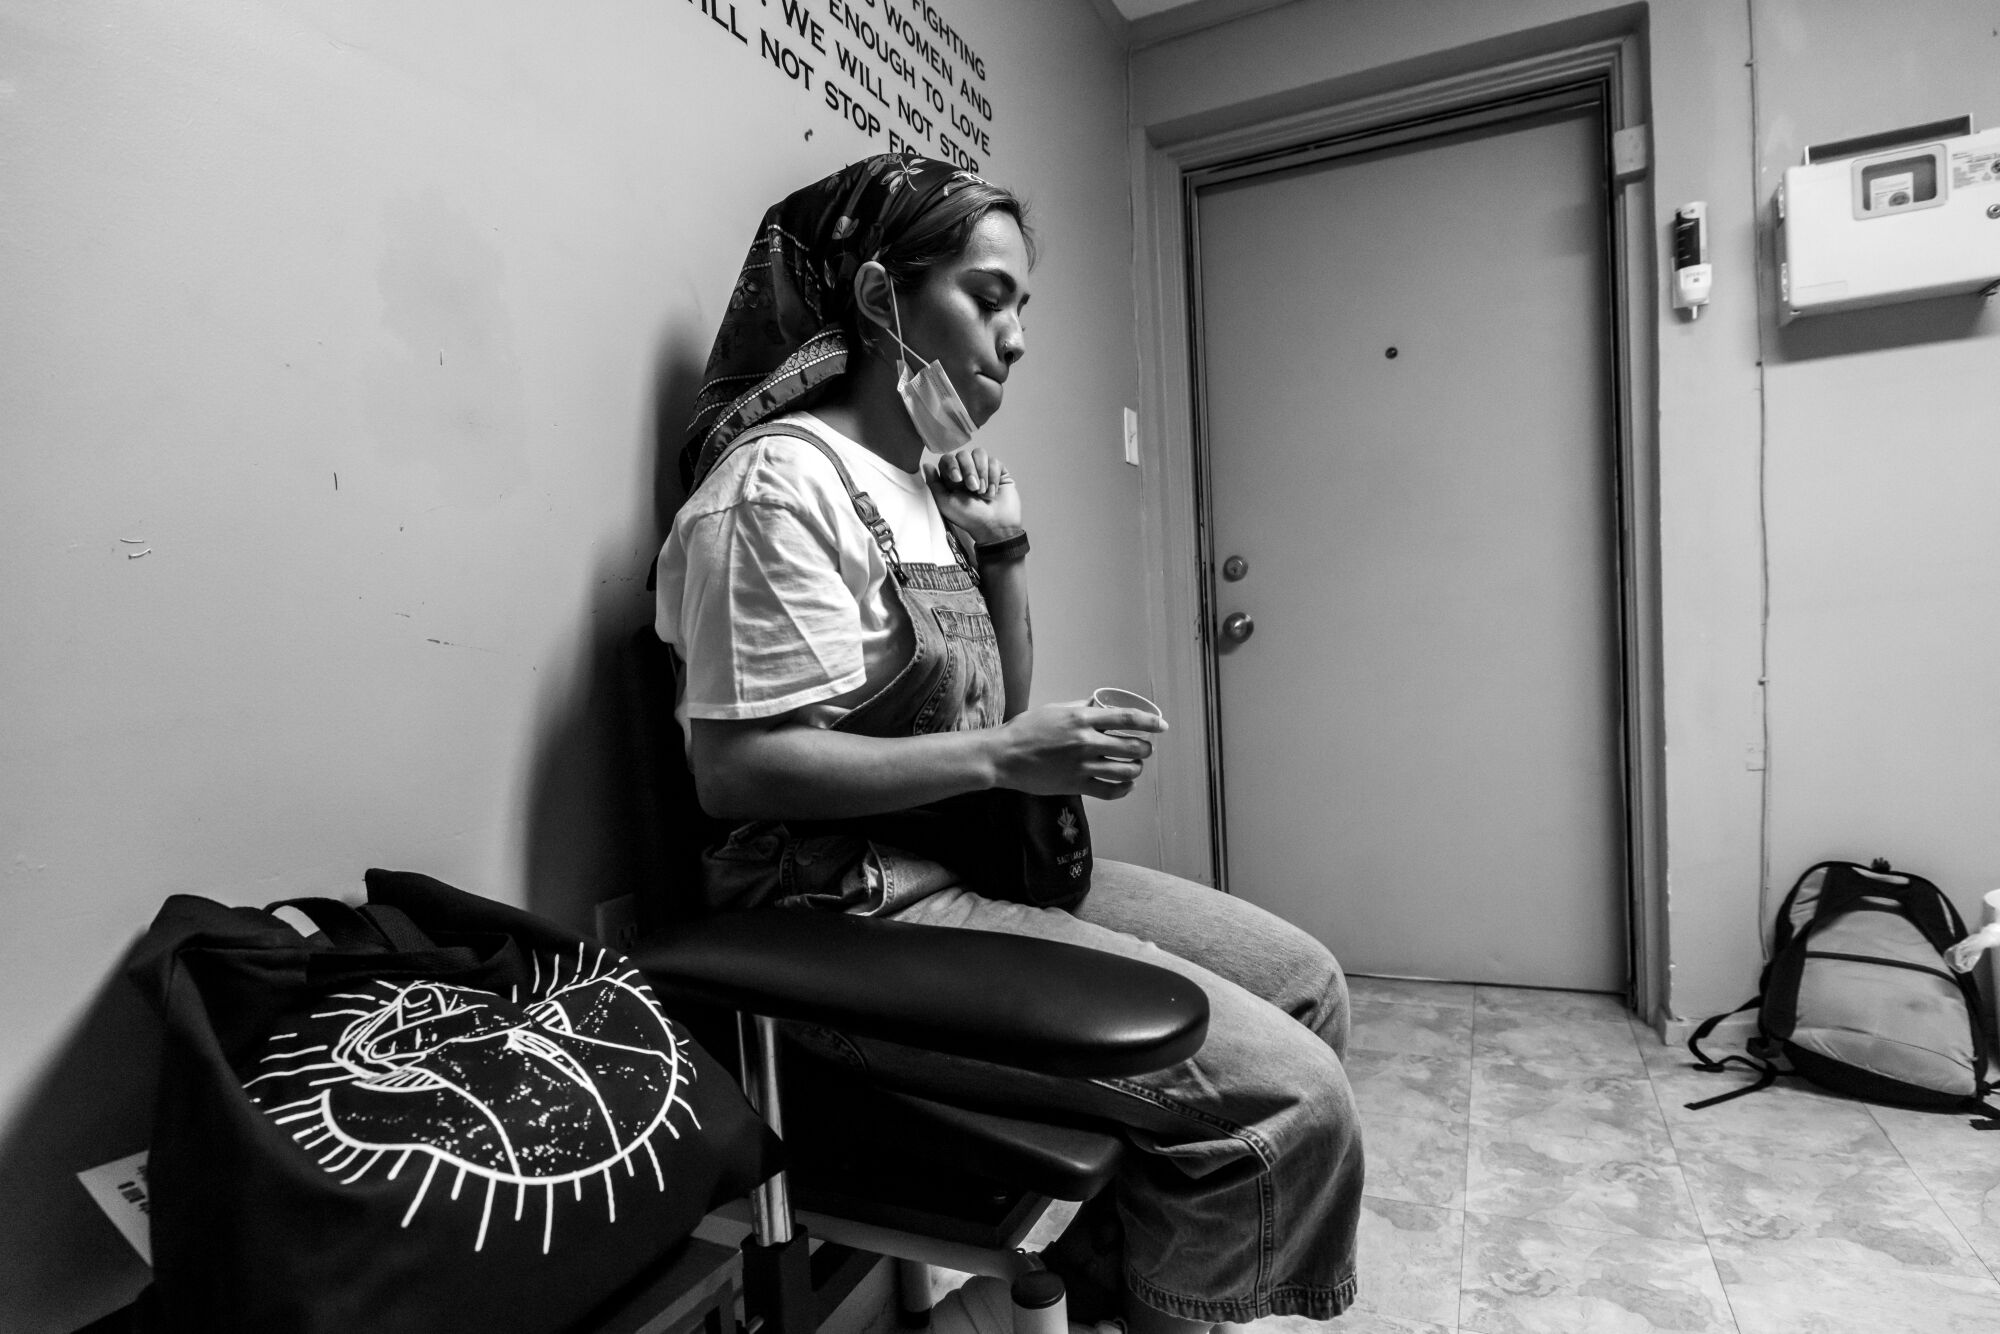 A woman sits in an exam room on a chair against a wall